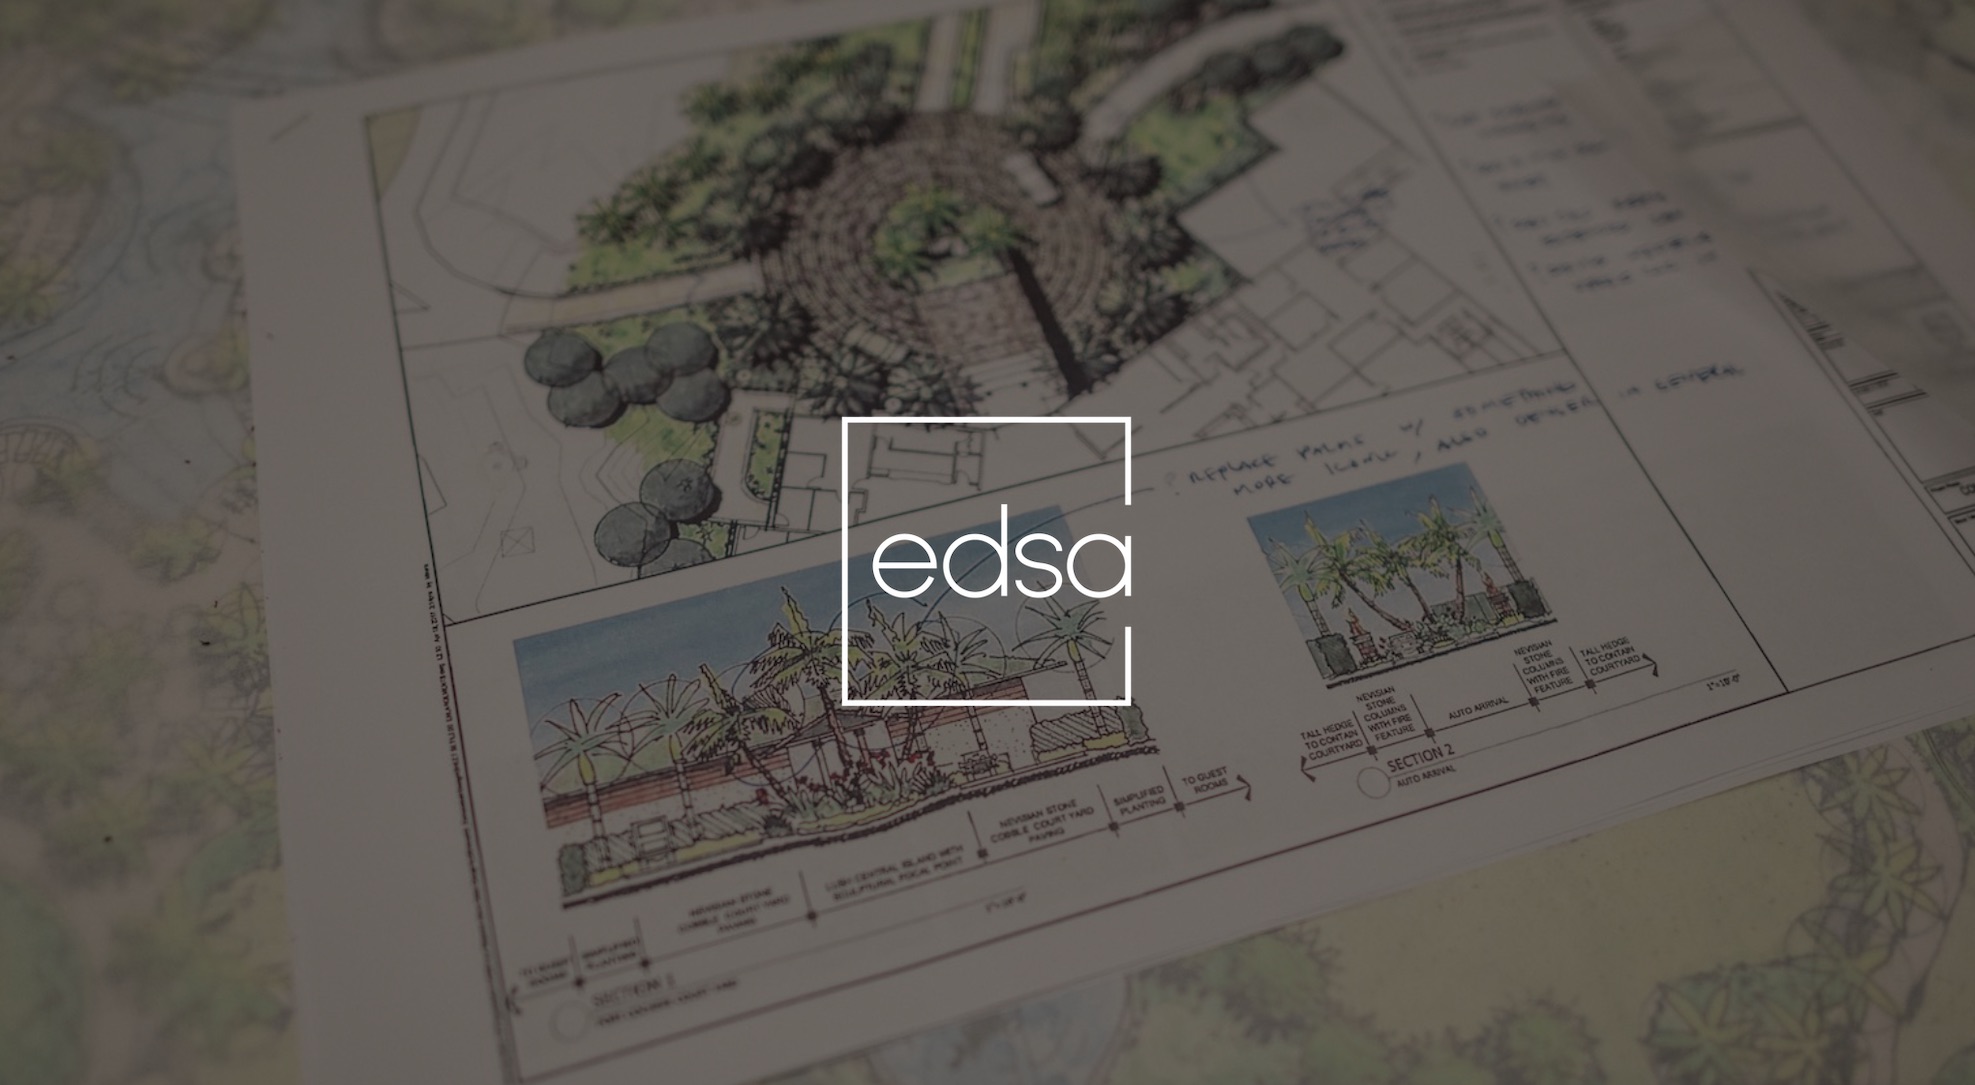 White EDSA Logo Social Media Marketing with background showing a color architectural drawing